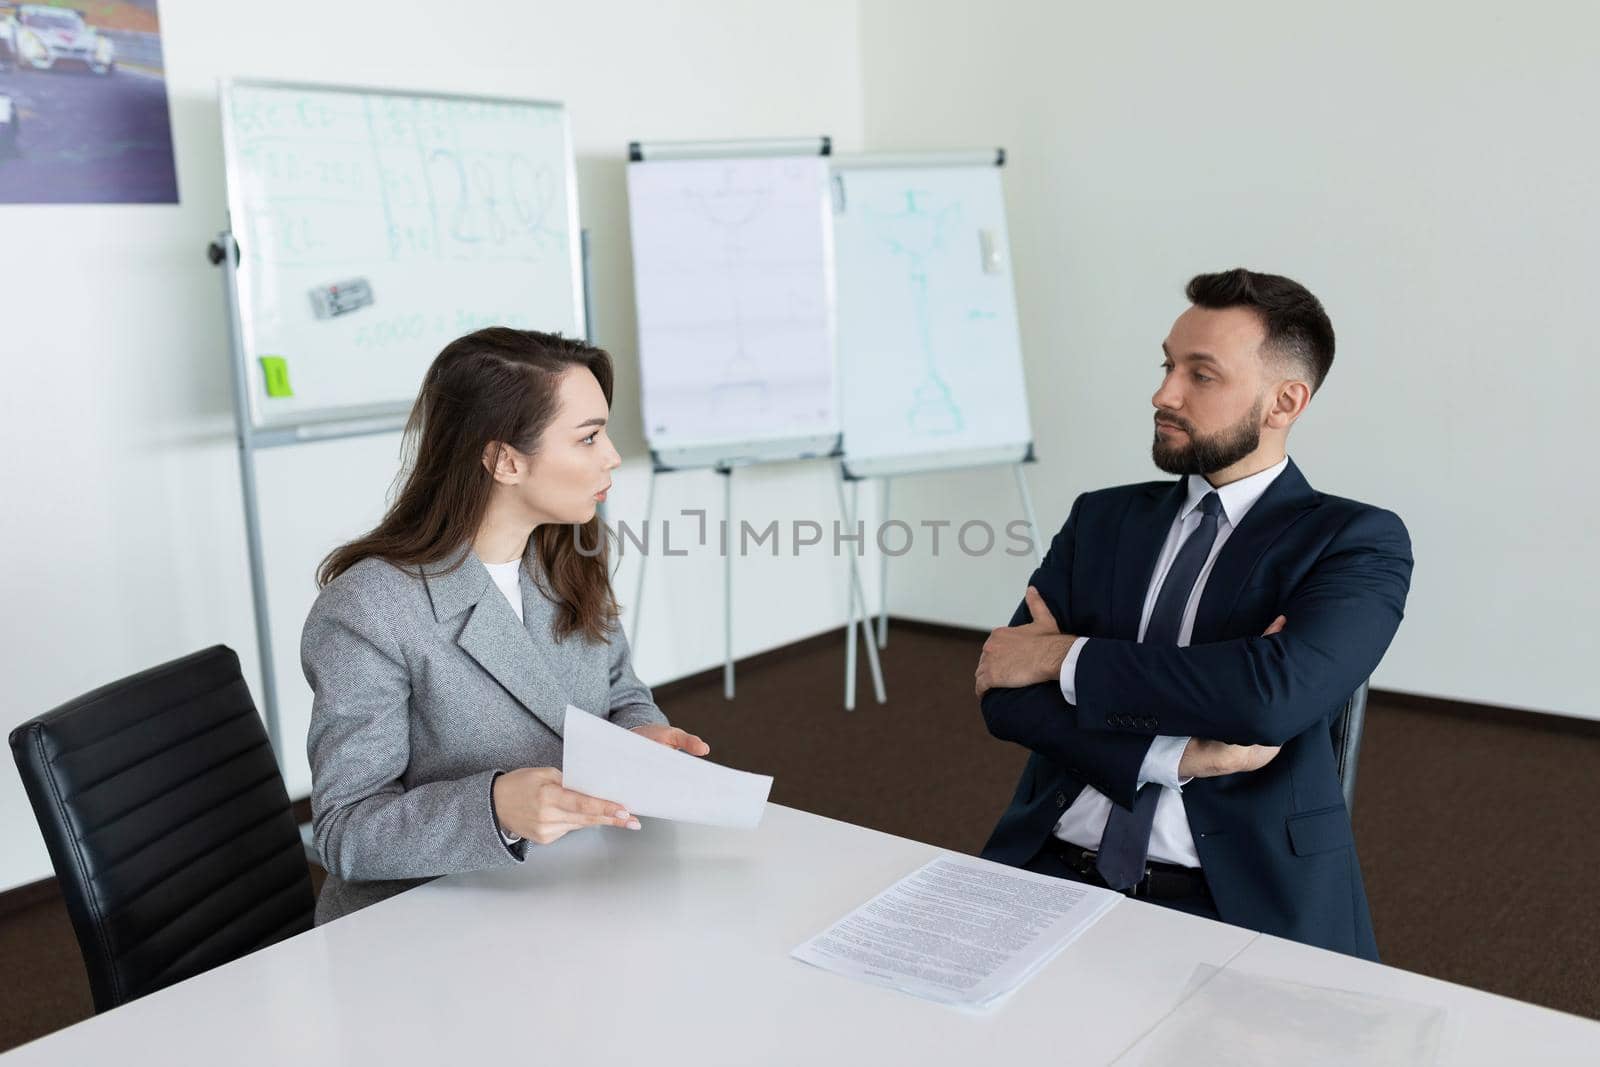 meeting in the meeting room of two company employees in business suits.